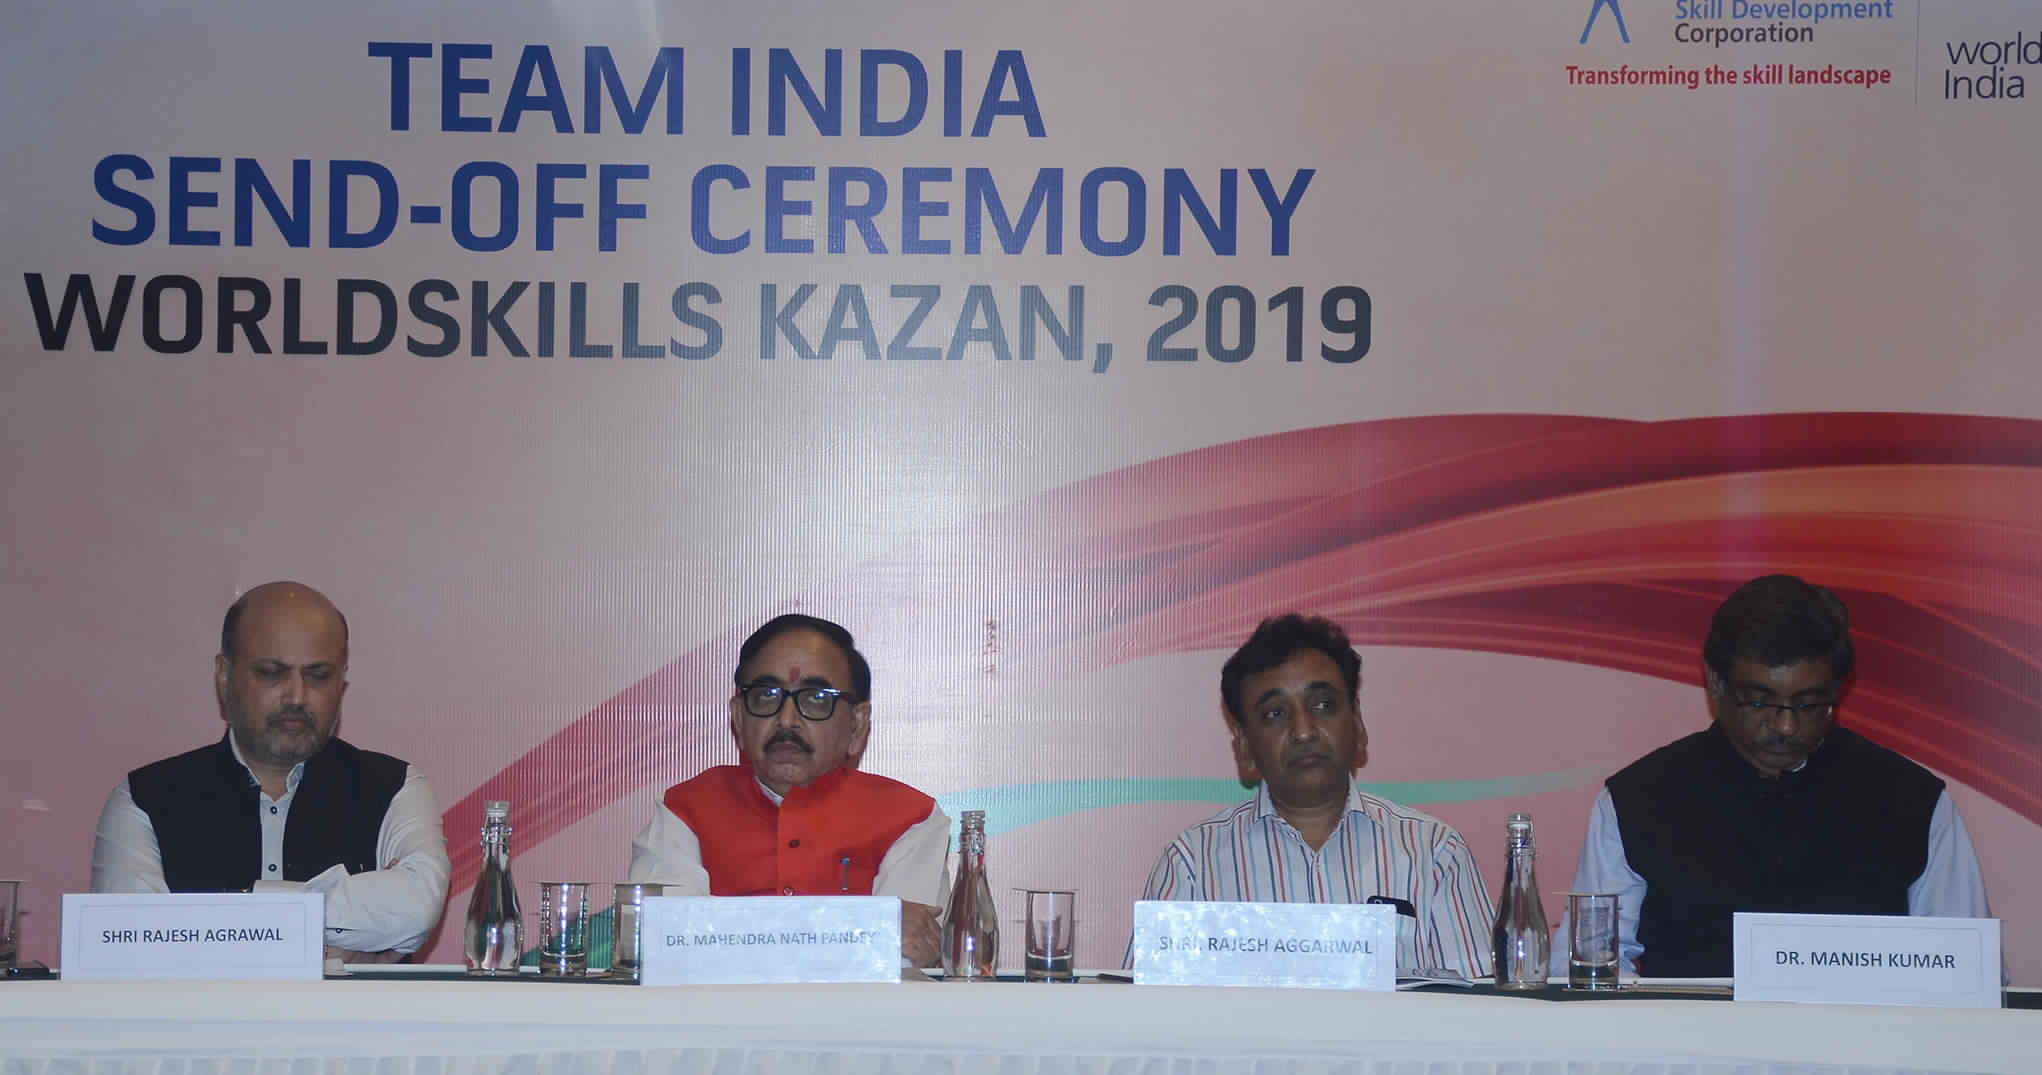 The Union Minister for Skill Development and Entrepreneurship, Dr. Mahendra Nath Pandey at the Sending off Ceremony of Team India representing the country, at the World Skills International Competition 2019, in New Delhi on August 18, 2019.